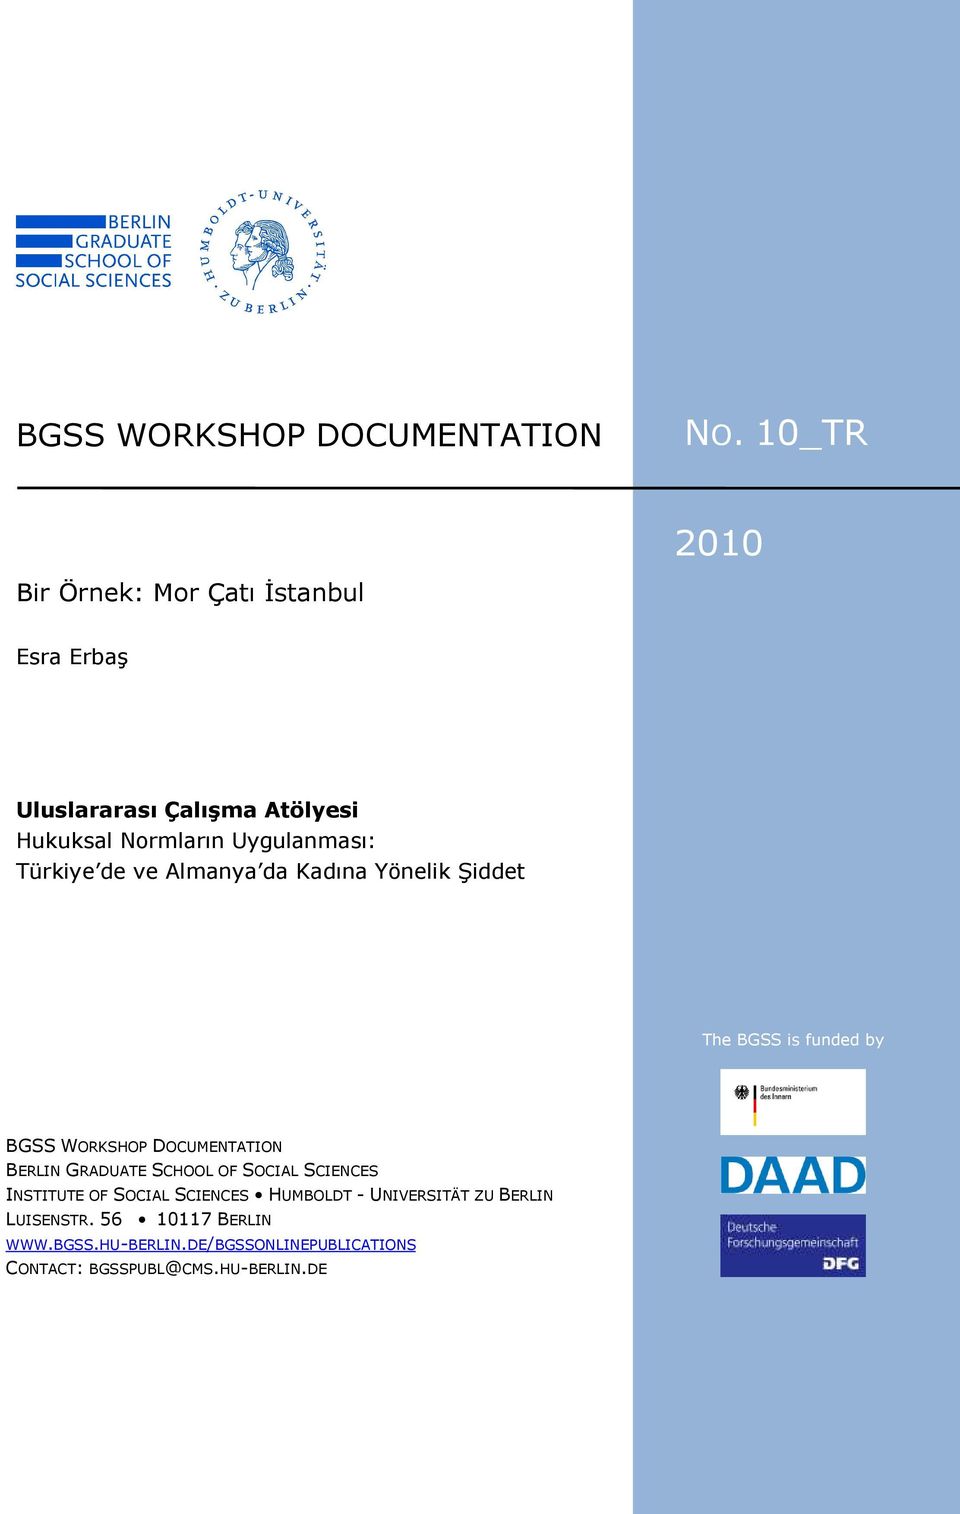 Şiddet The BGSS is funded by BGSS WORKSHOP DOCUMENTATION BERLIN GRADUATE SCHOOL OF SOCIAL SCIENCES INSTITUTE OF SOCIAL